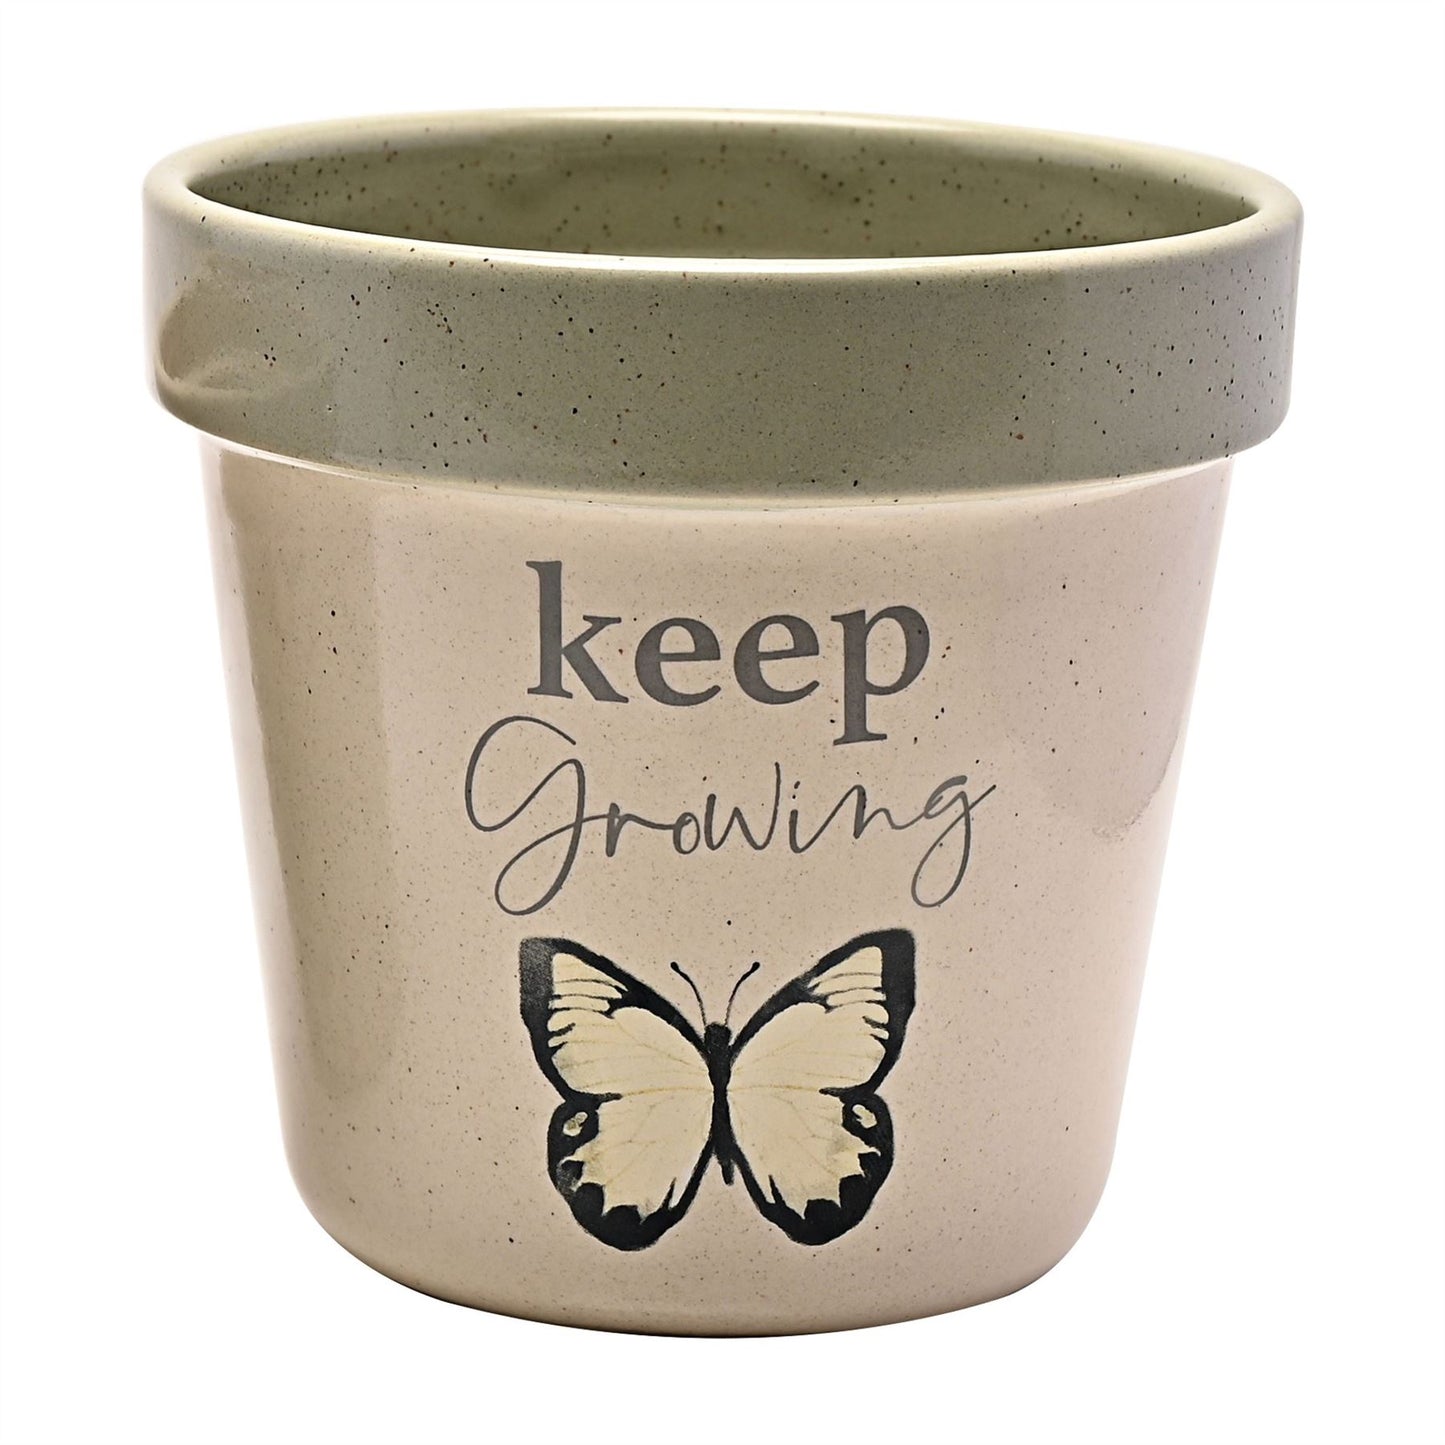 Country Living Set of 2 Planters - Butterfly